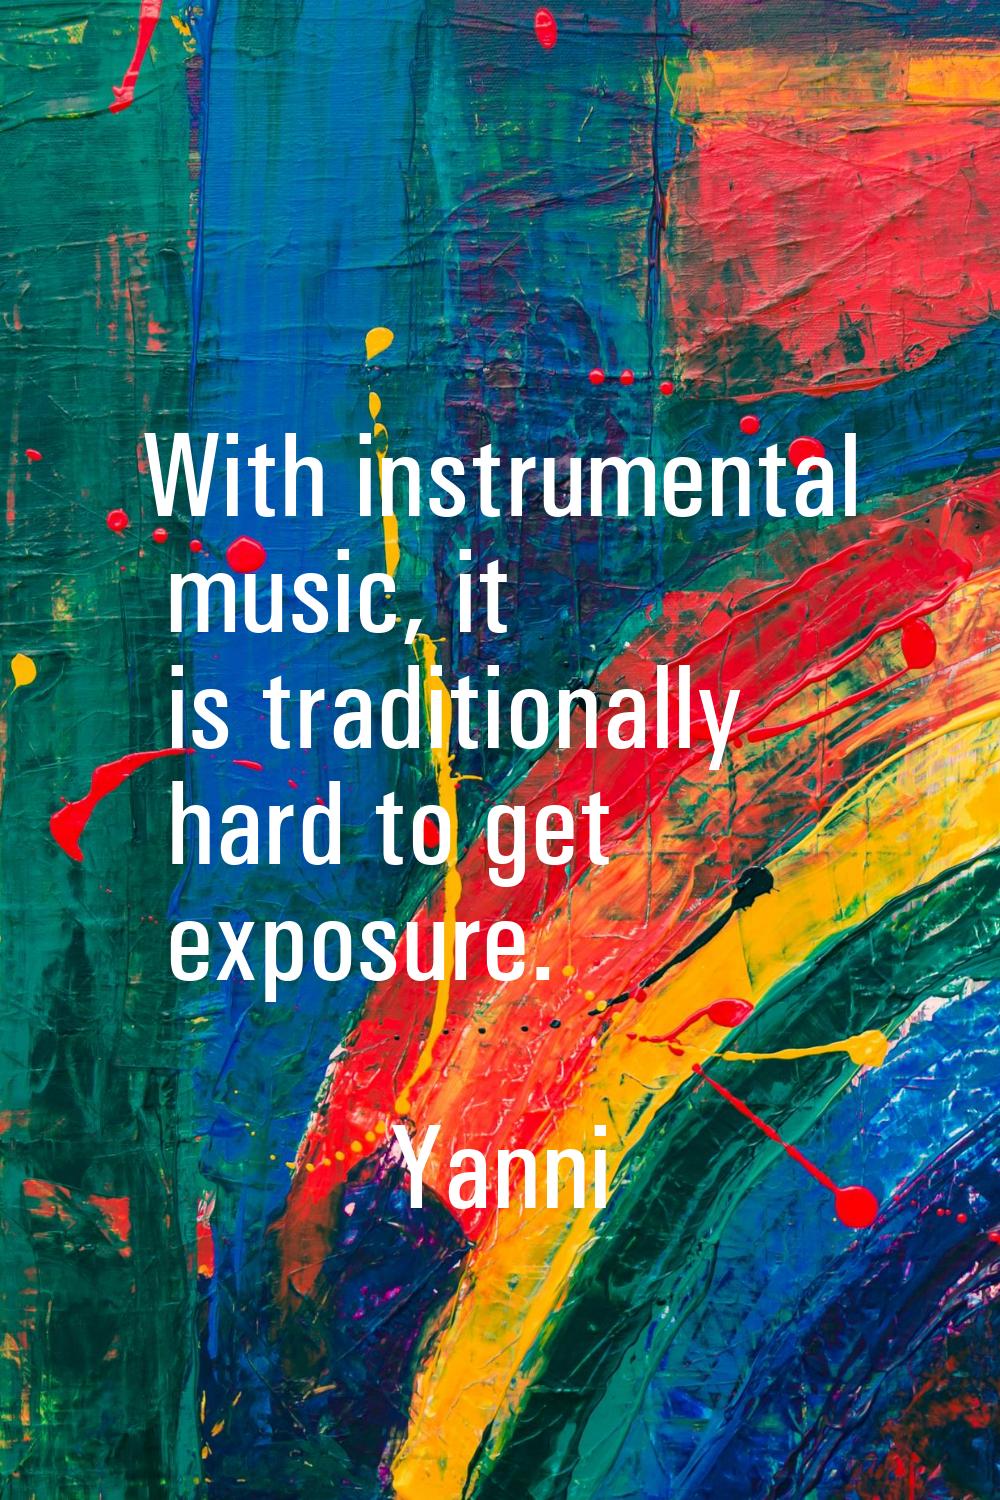 With instrumental music, it is traditionally hard to get exposure.